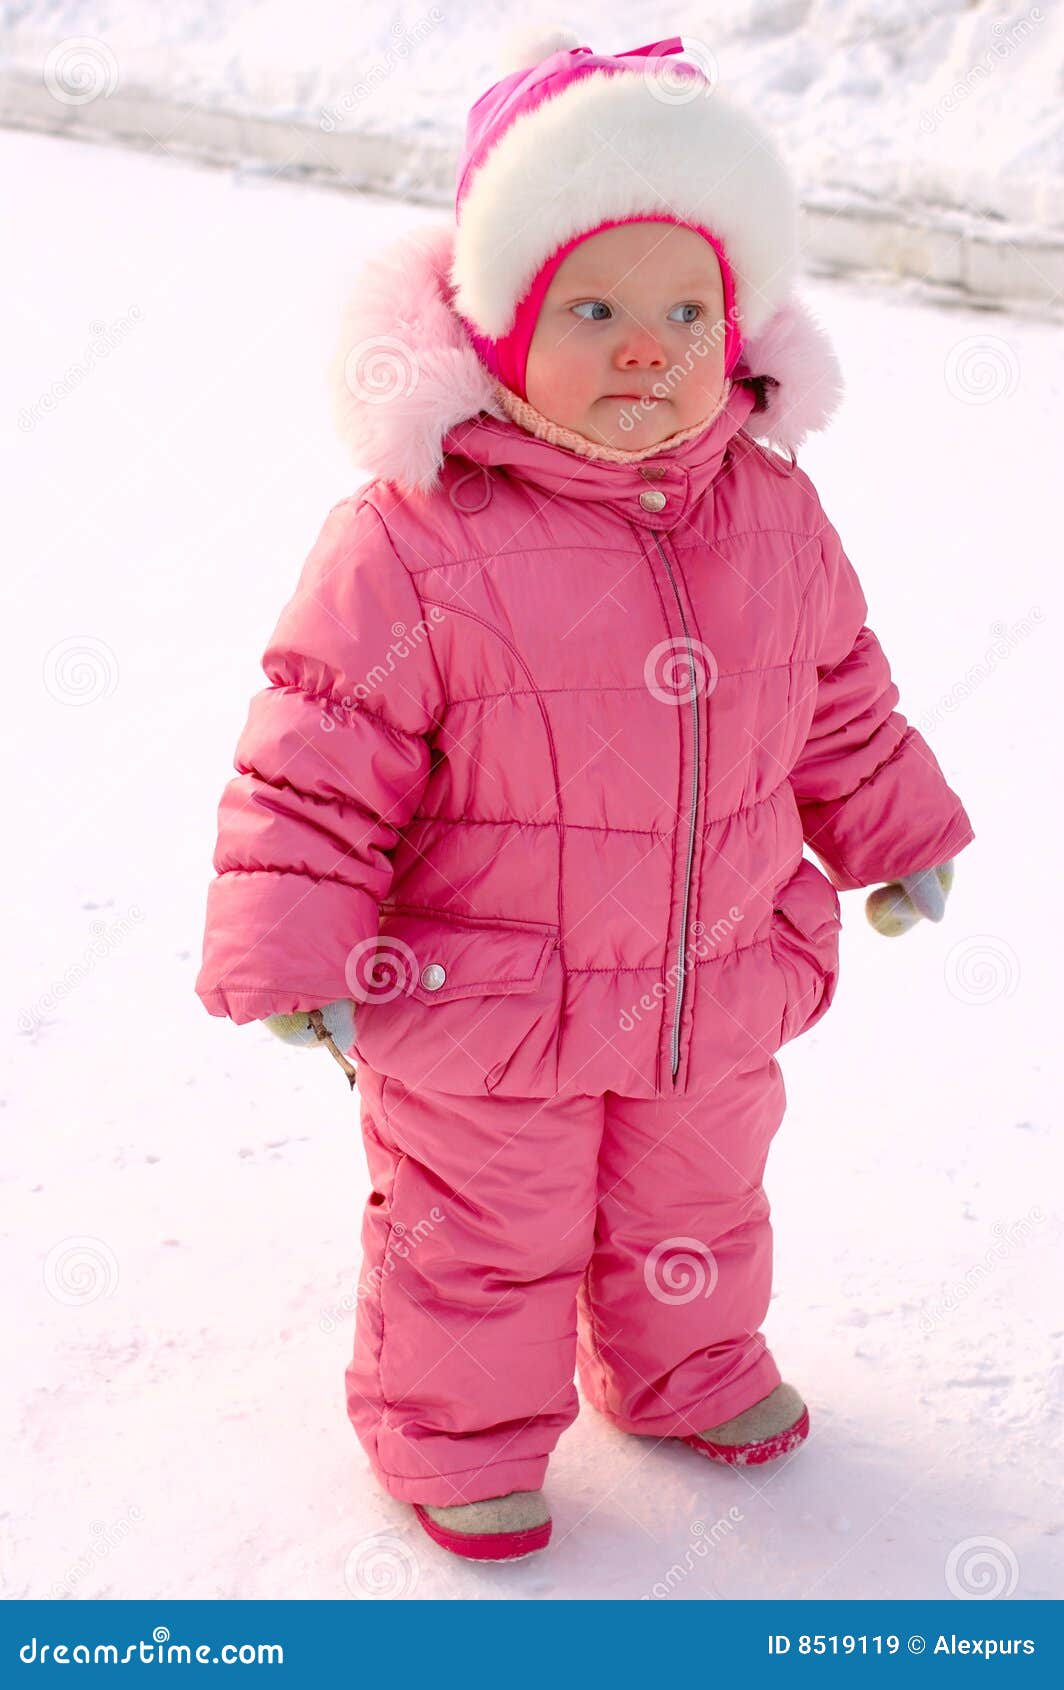 15,295 Winter Outerwear Stock Photos - Free & Royalty-Free Stock Photos  from Dreamstime